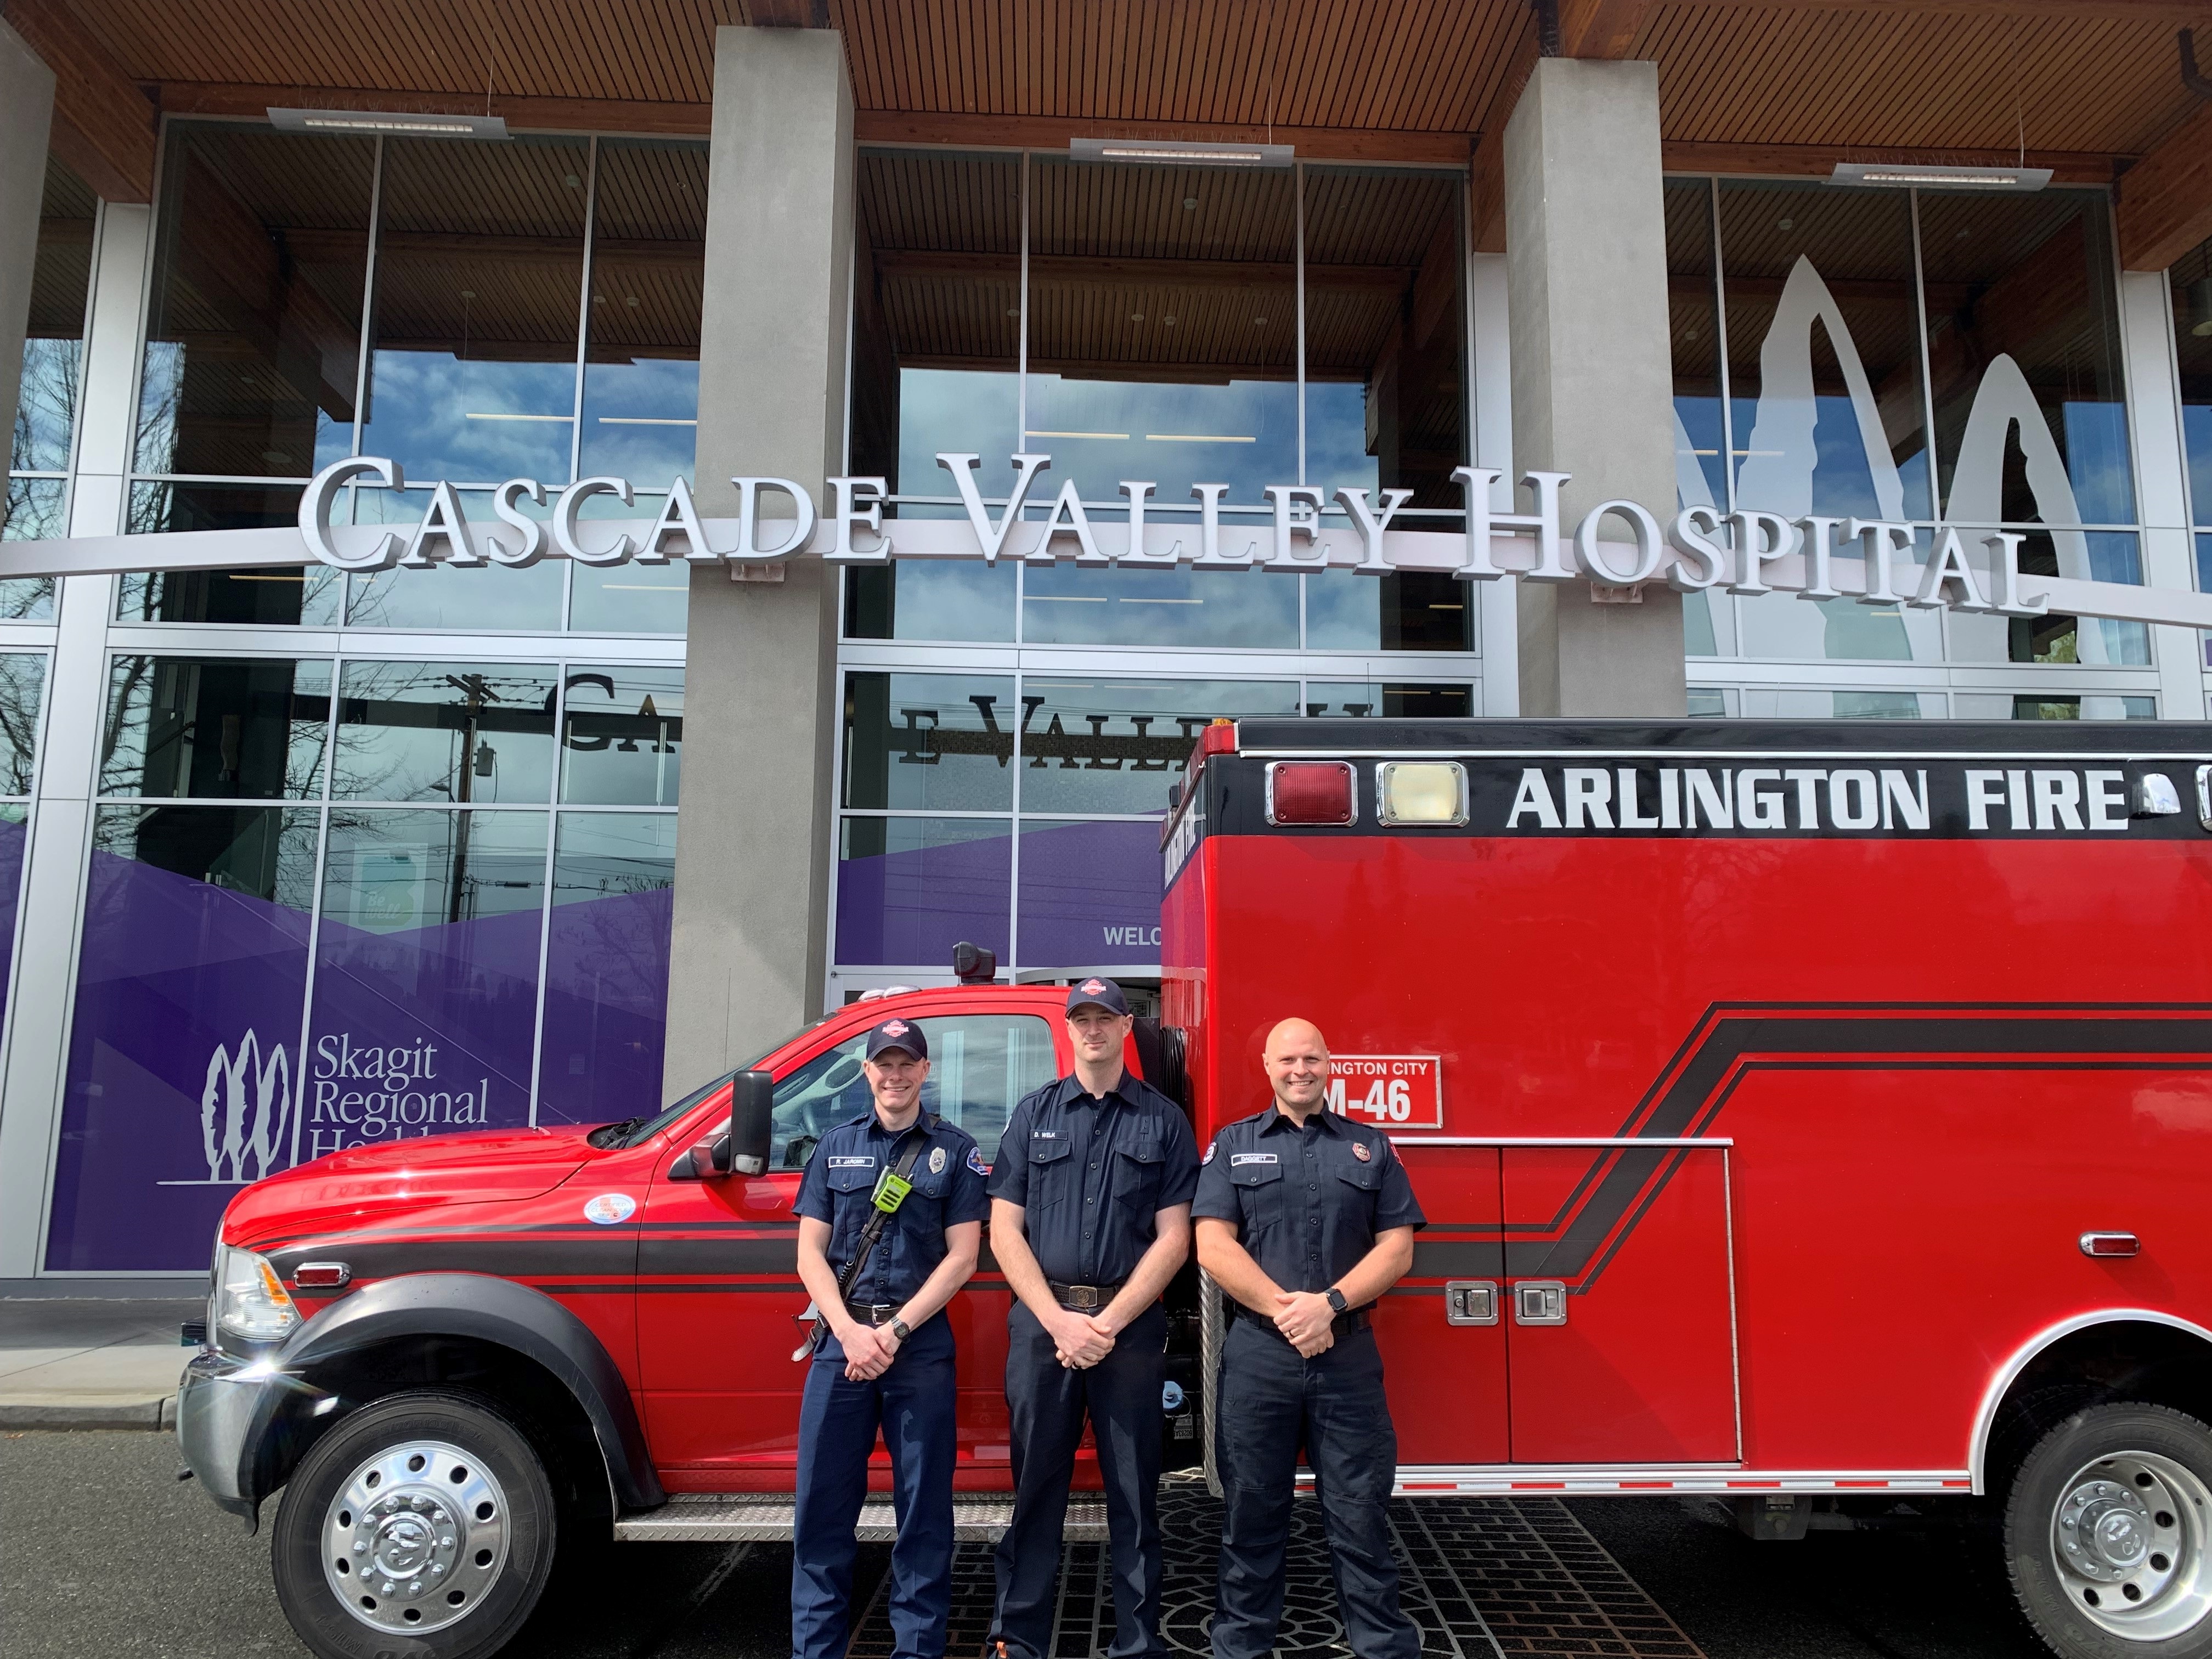 Three Arlington Fire Department firefighters pose in front of ambulance parked in front of Cascade Valley Hospital entrance. 